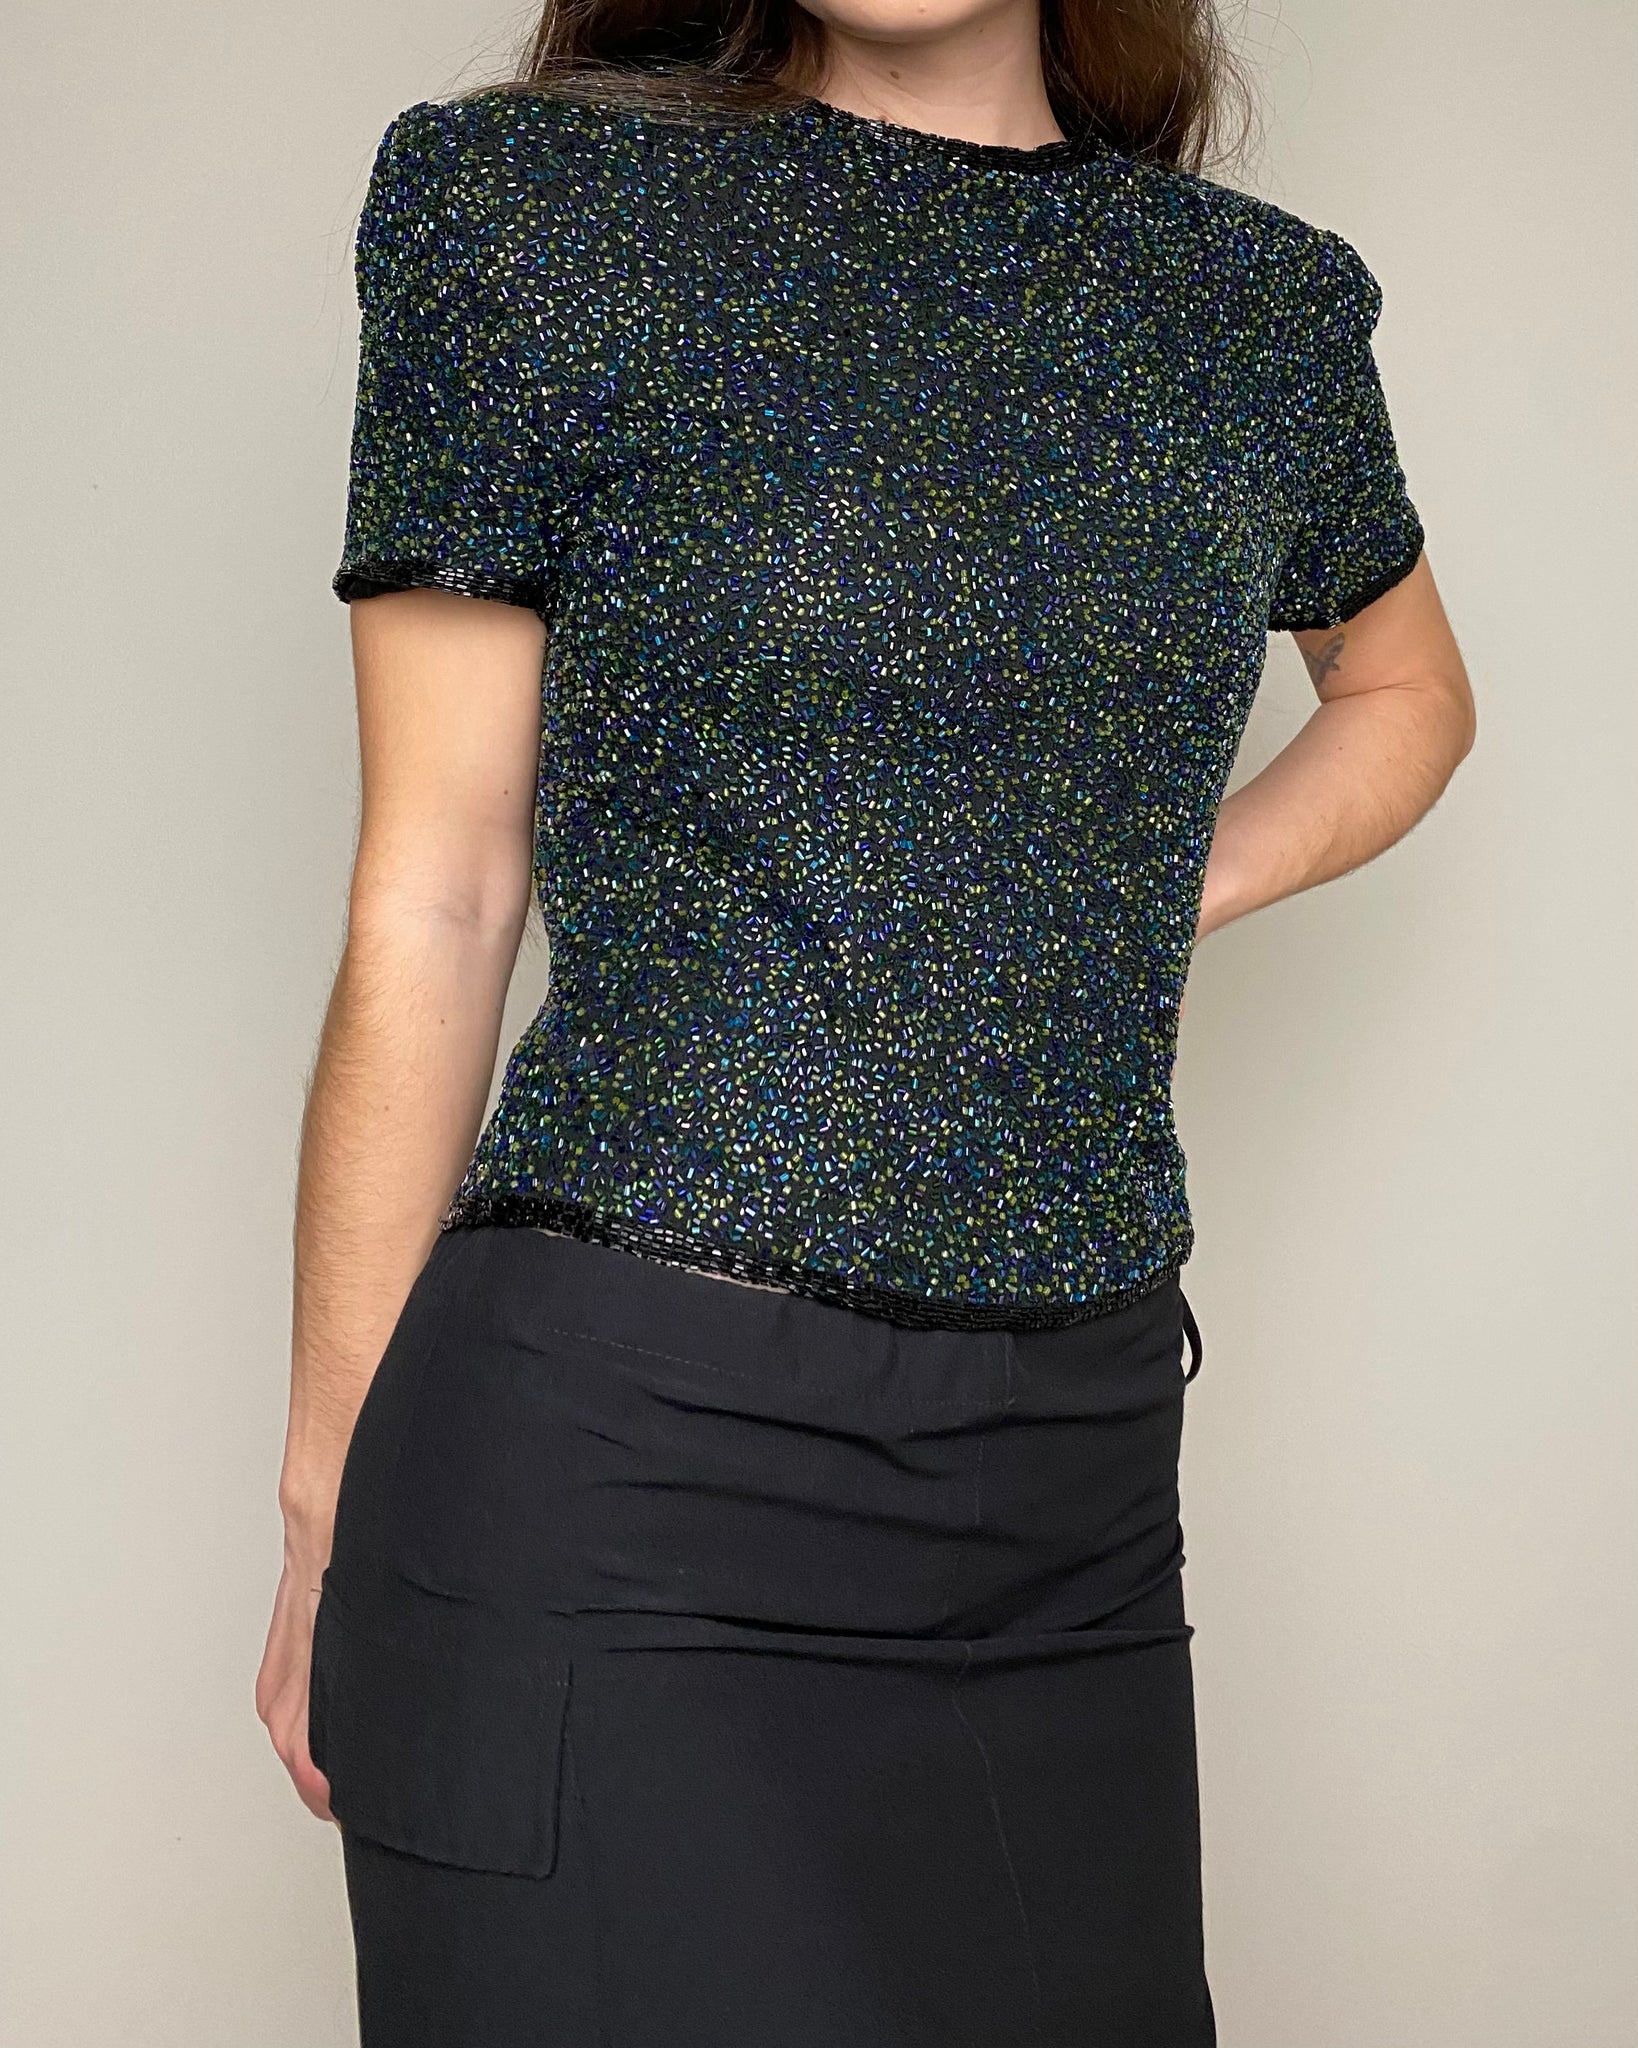 80s Adrianna Papéll Beaded Top (size S)